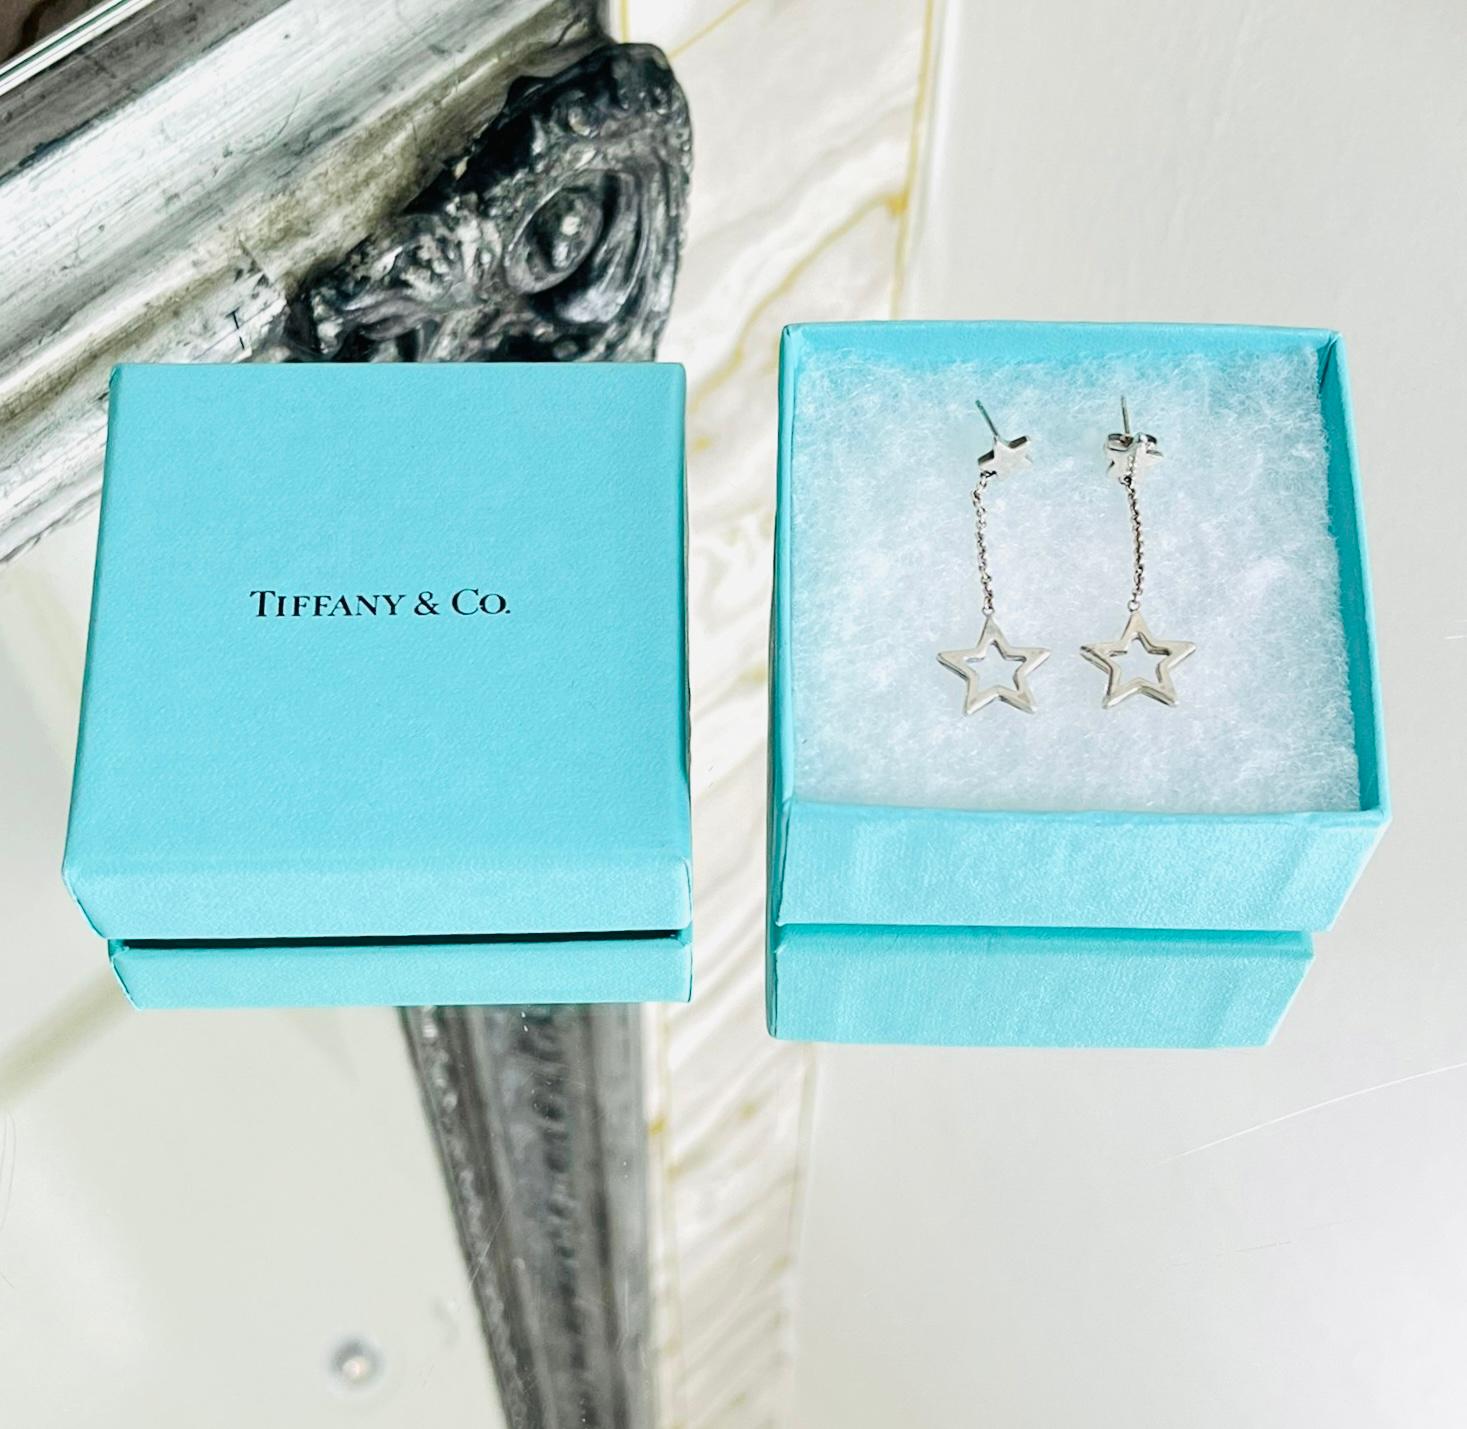 Tiffany & Co. Sterling Silver Star Drop Earrings

Silver dangle earrings designed with tiny stars and chain link drop with star hoops.

Featuring butterfly back closure.

Size – One Size

Condition – Good (One butterfly back missing, light